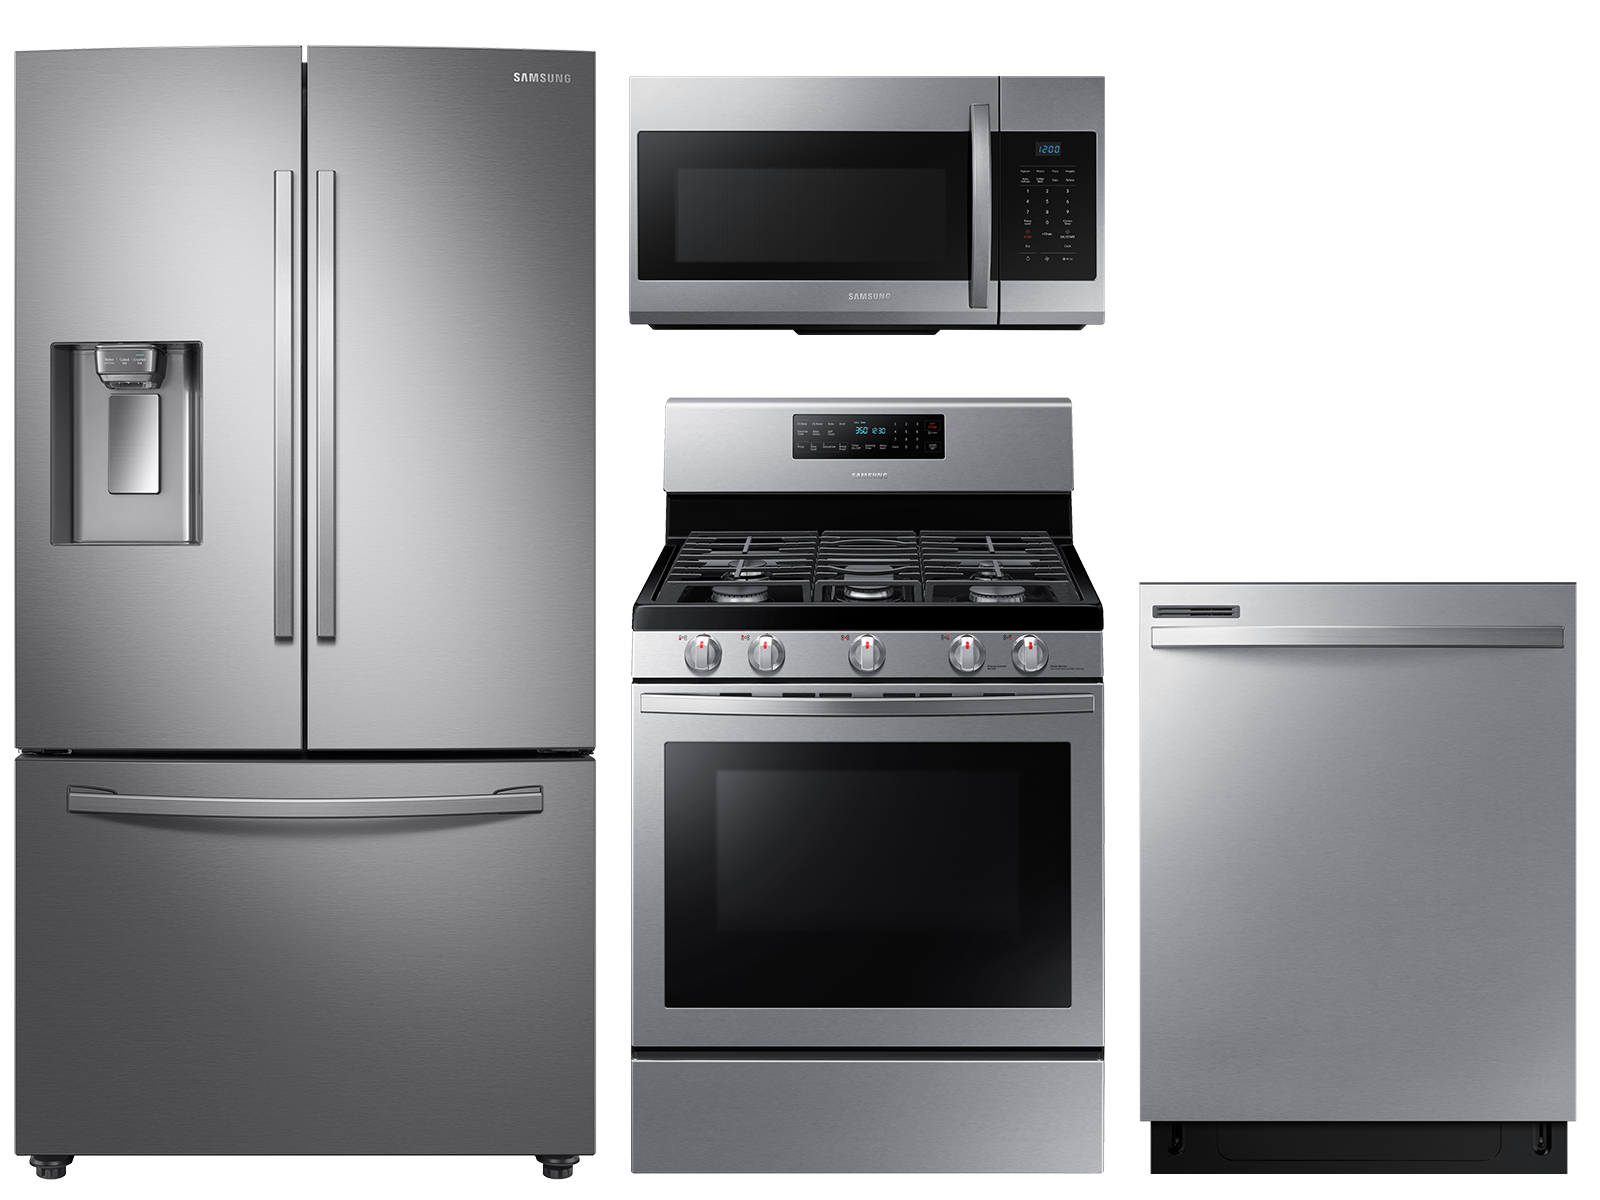 Large Capacity 3-door Refrigerator + Gas Range with Convection + 55 dBA Dishwasher + Microwave in Stainless Steel